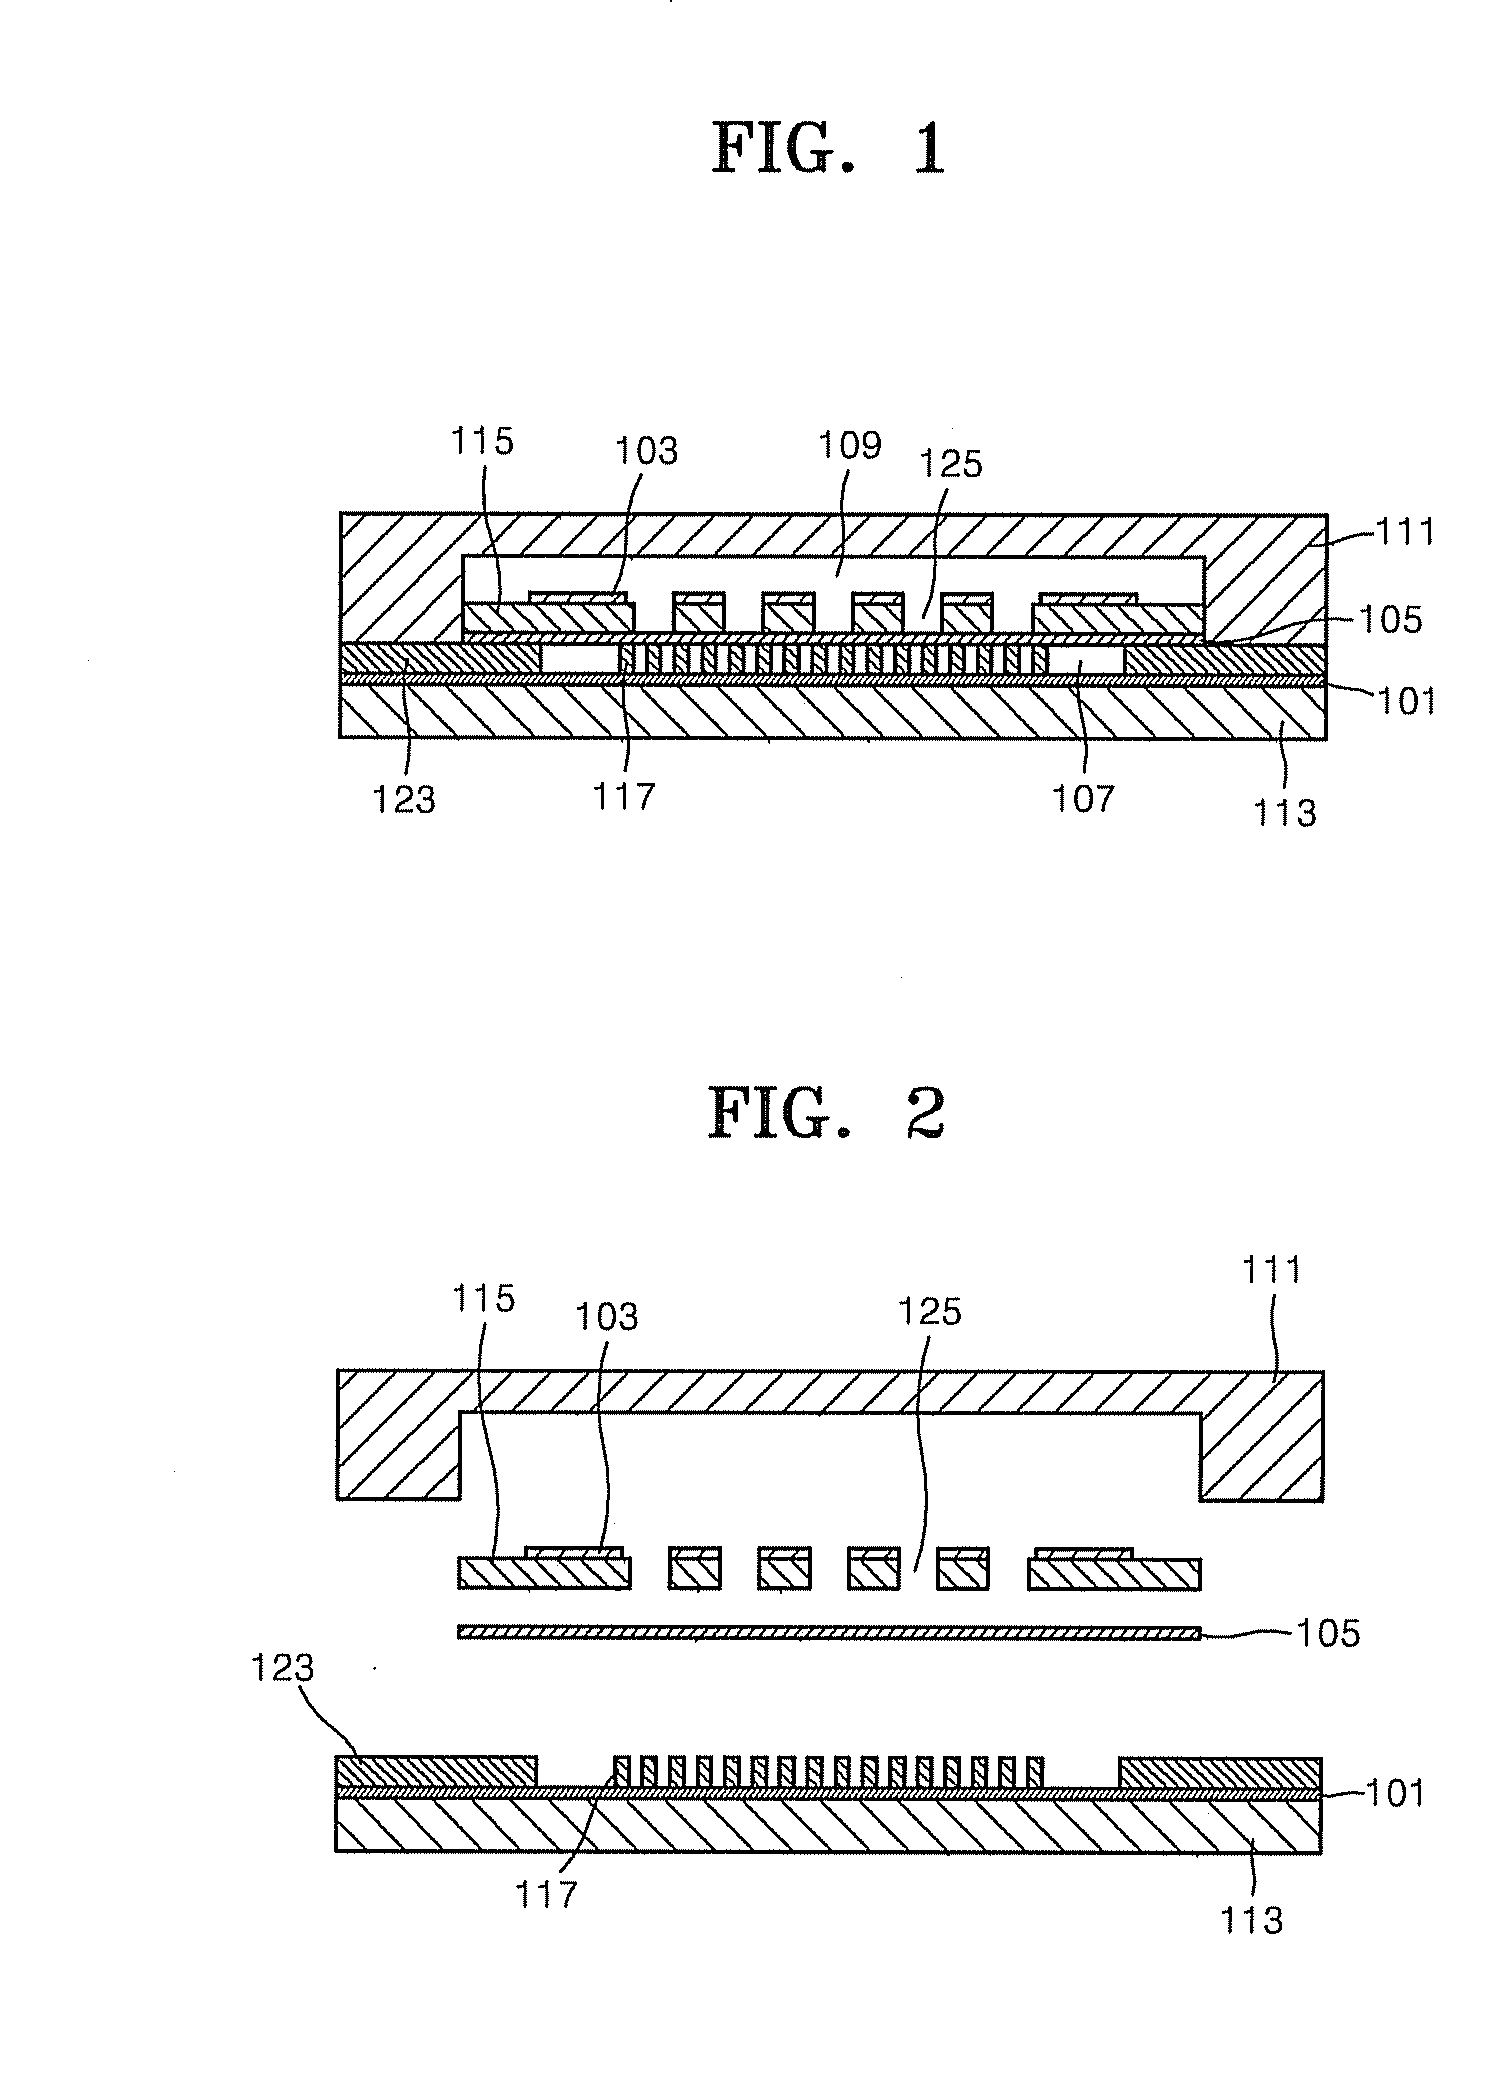 MICROFLUIDIC DEVICE FOR ELECTROCHEMICALLY REGULATING pH OF FLUID AND METHOD OF REGULATING pH OF FLUID USING THE MICROFLUIDIC DEVICE